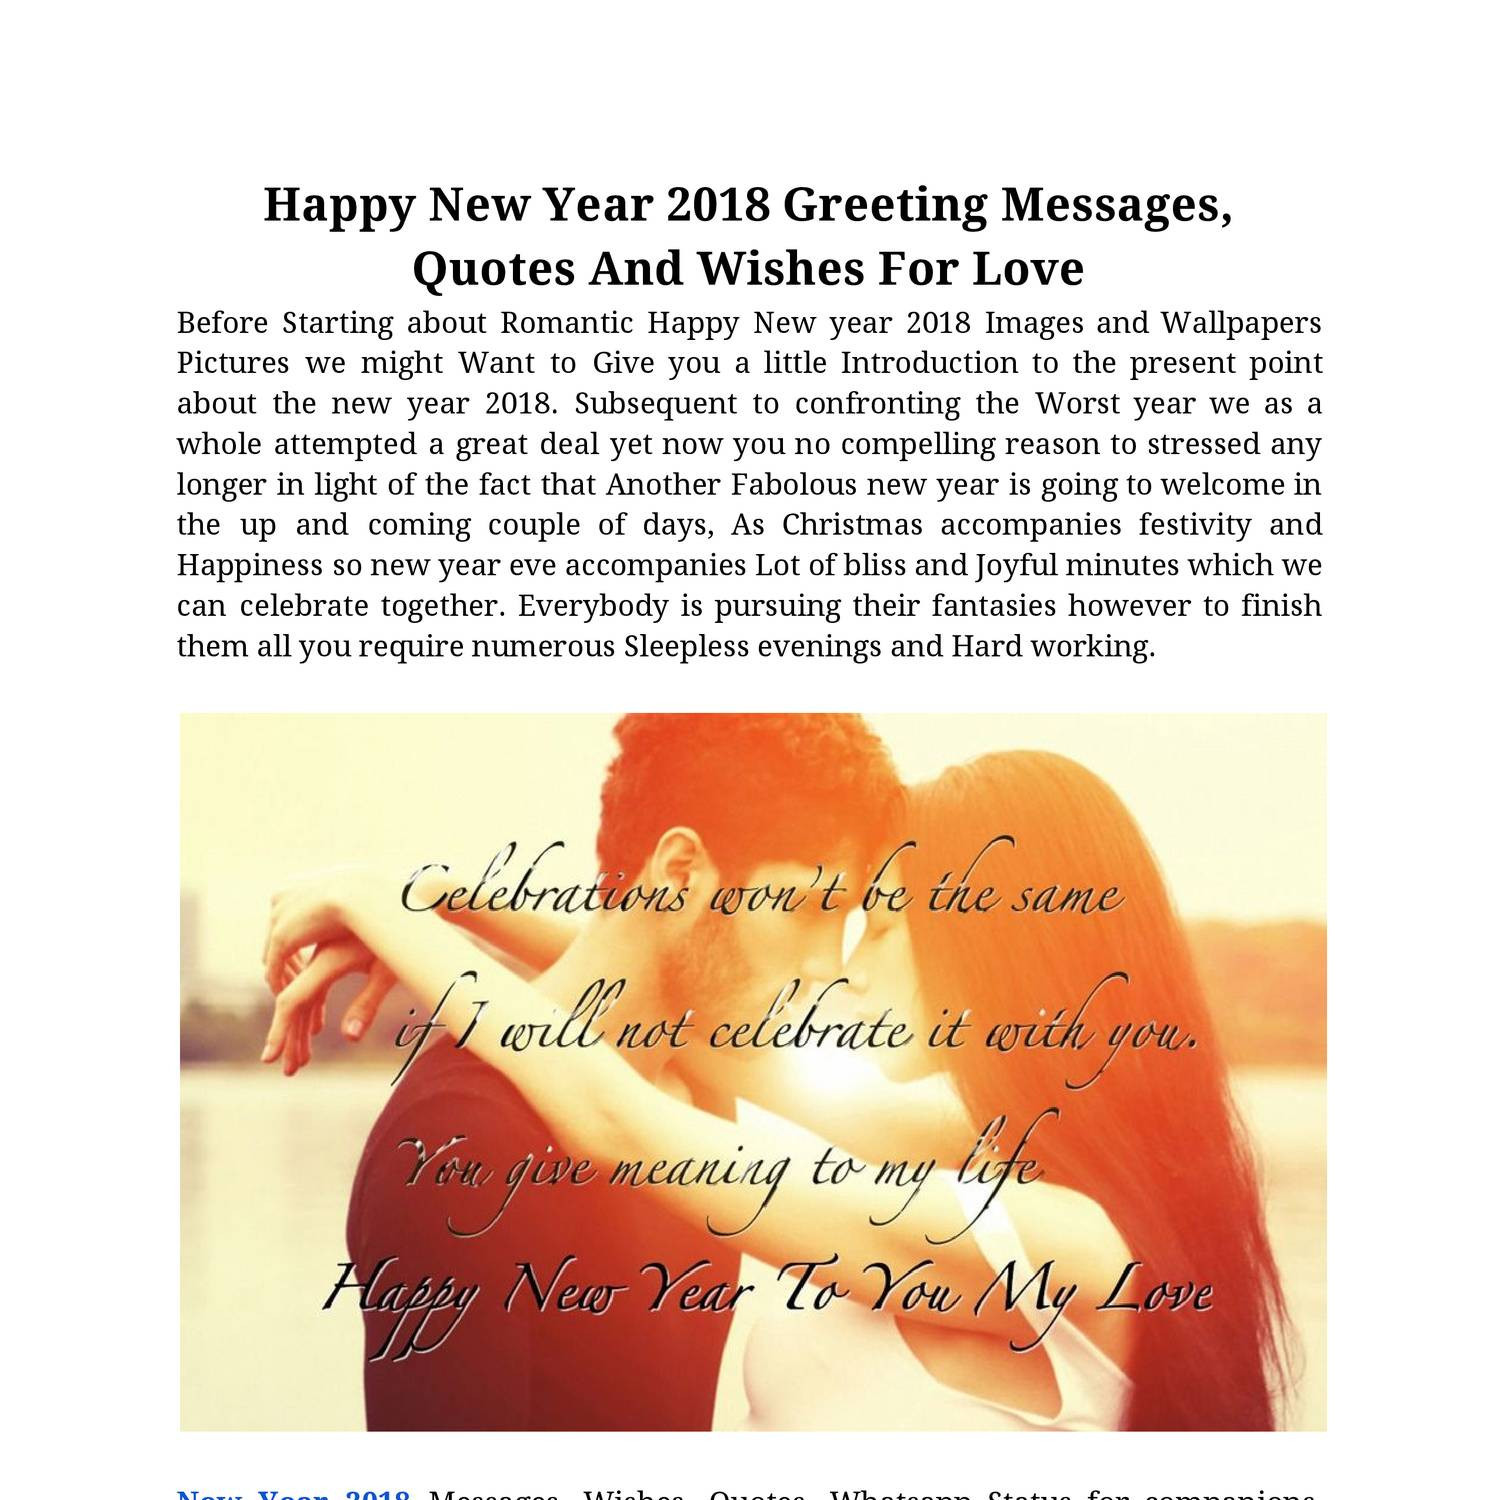 Happy New Year My Love Quotes
 Happy New Year 2018 Greeting Messages Quotes And Wishes